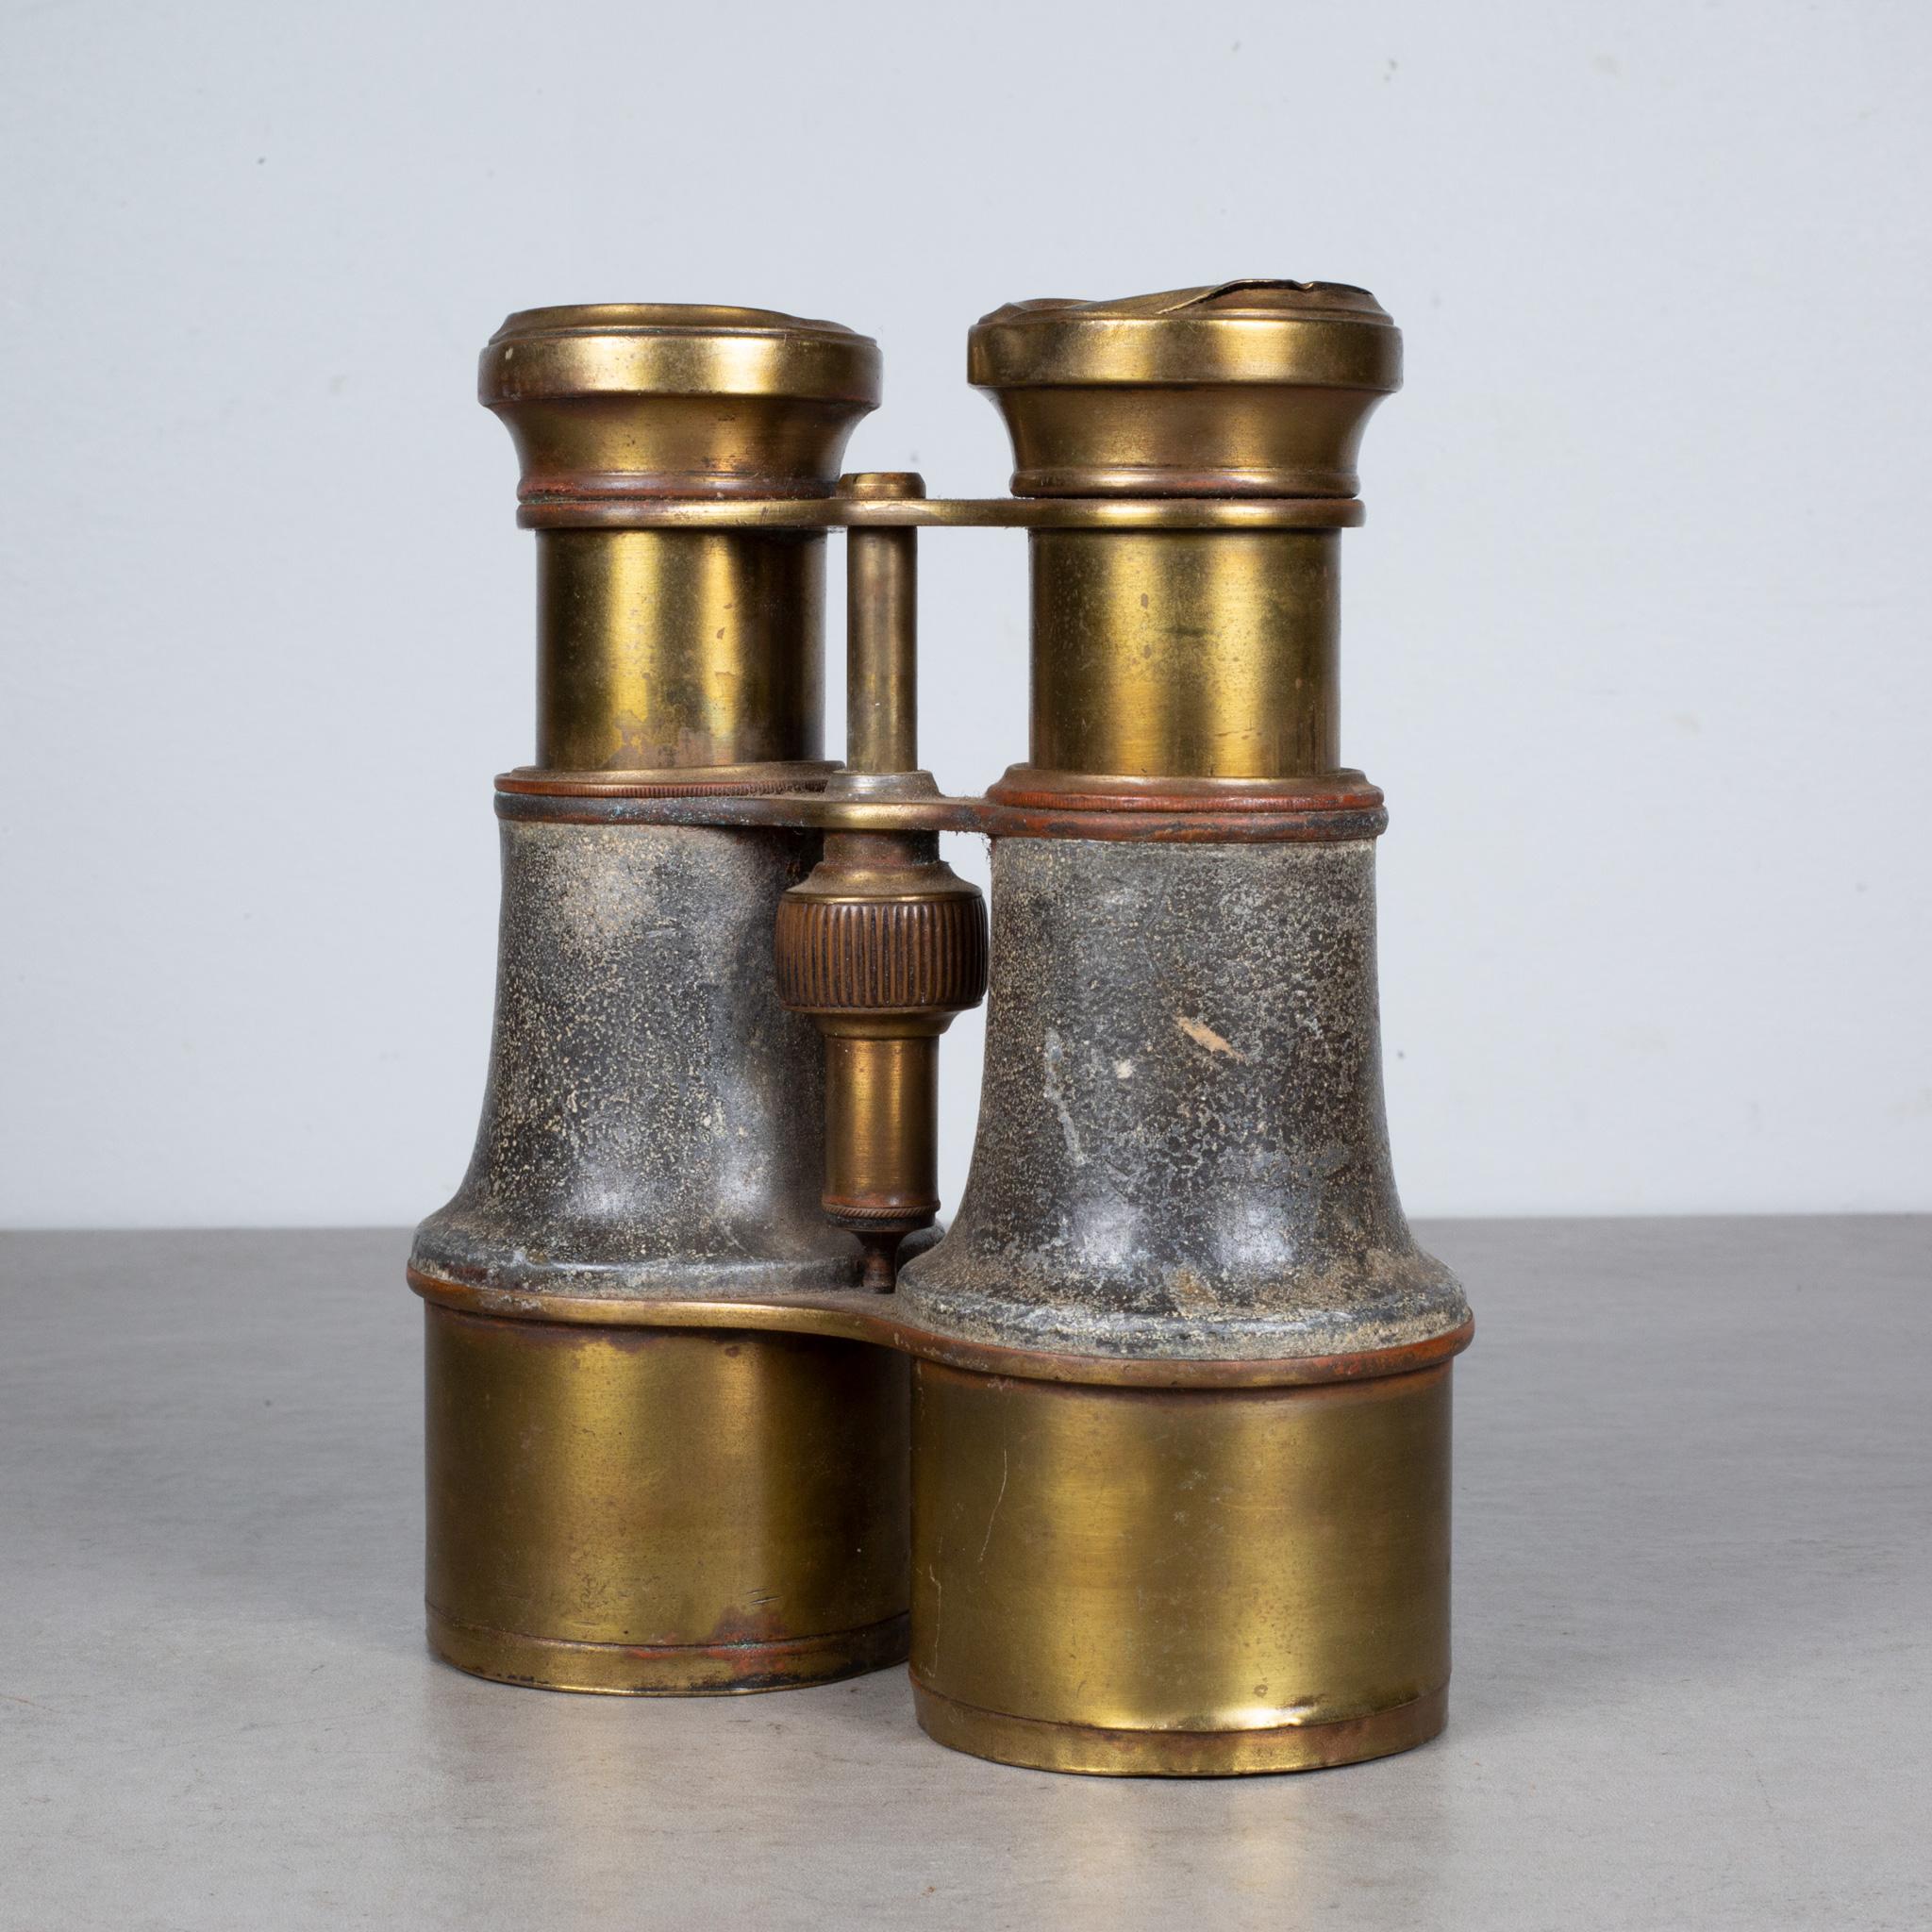 ABOUT

An original pair of brass field binoculars wrapped in leather. The objective lenses are clear and their optics are good. The metal focus wheel works well. The piece is in good condition with appropriate patina for its age. 

 CREATOR